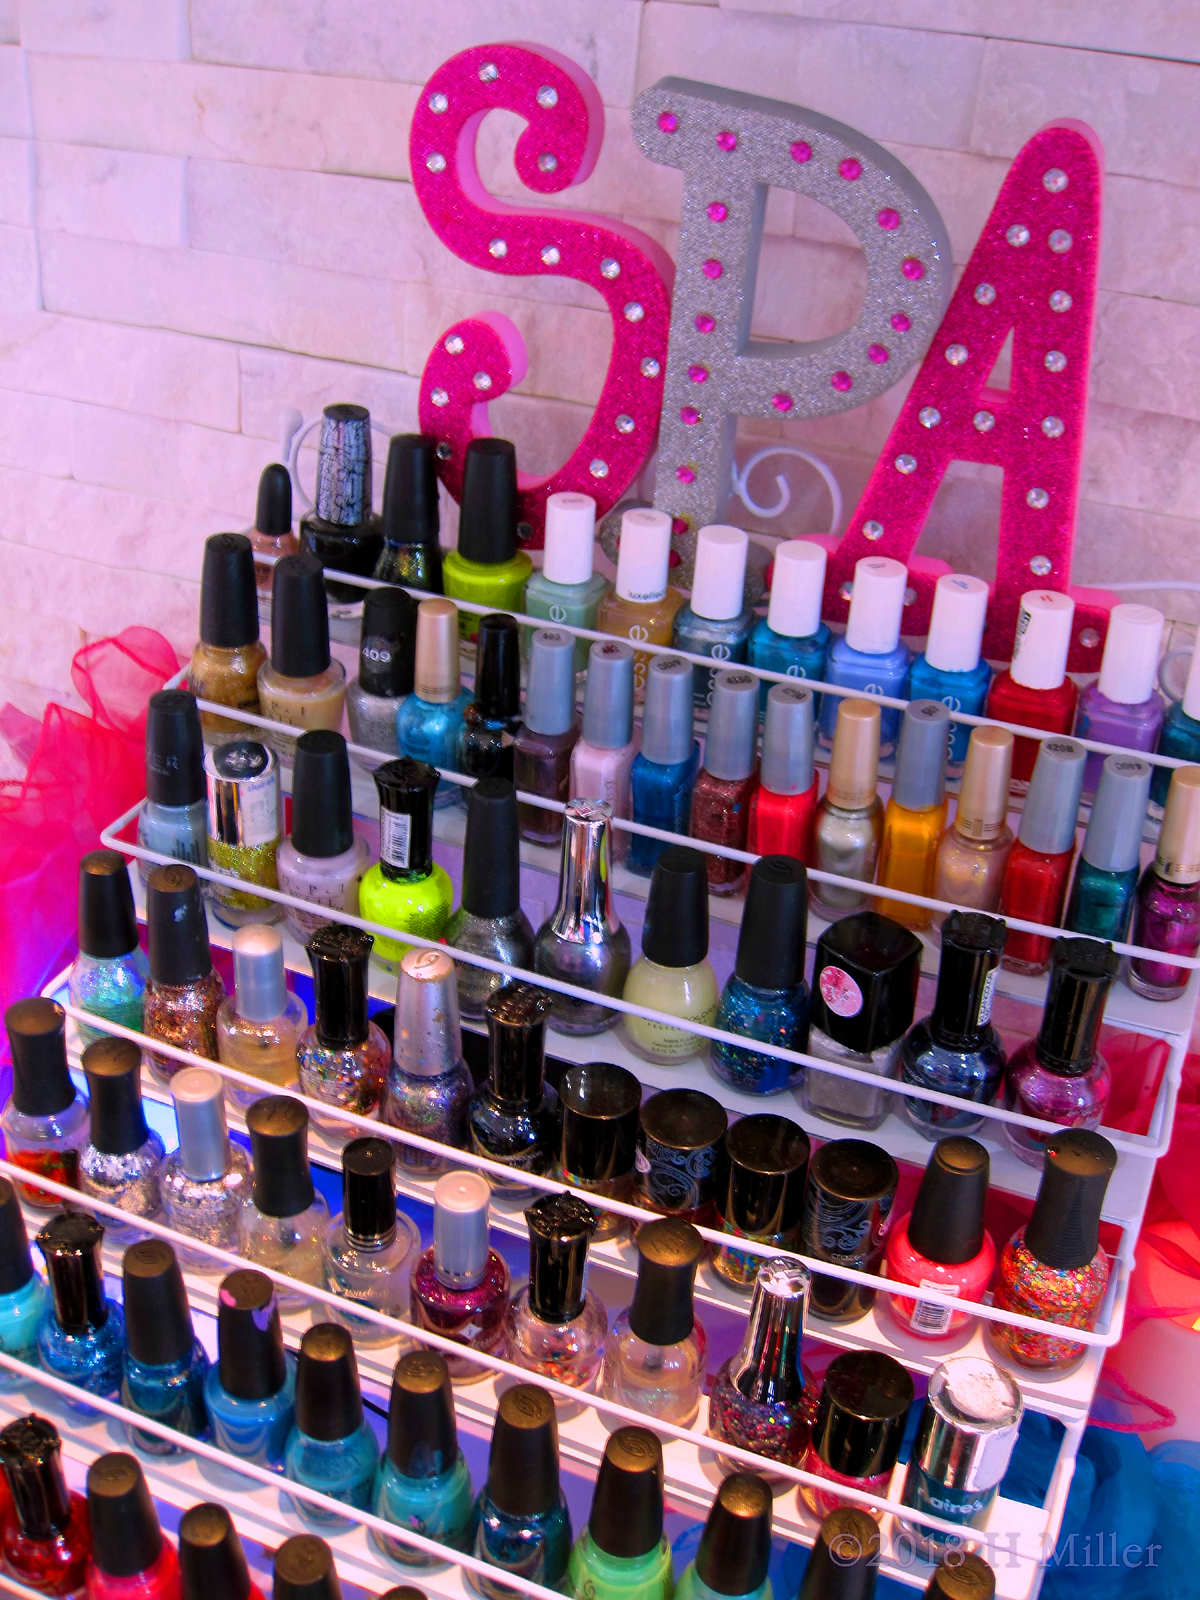 Glittery, Matte, Shiny! There's Everything The Kids Need For The Perfect Mani At The Kids Nail Salon.